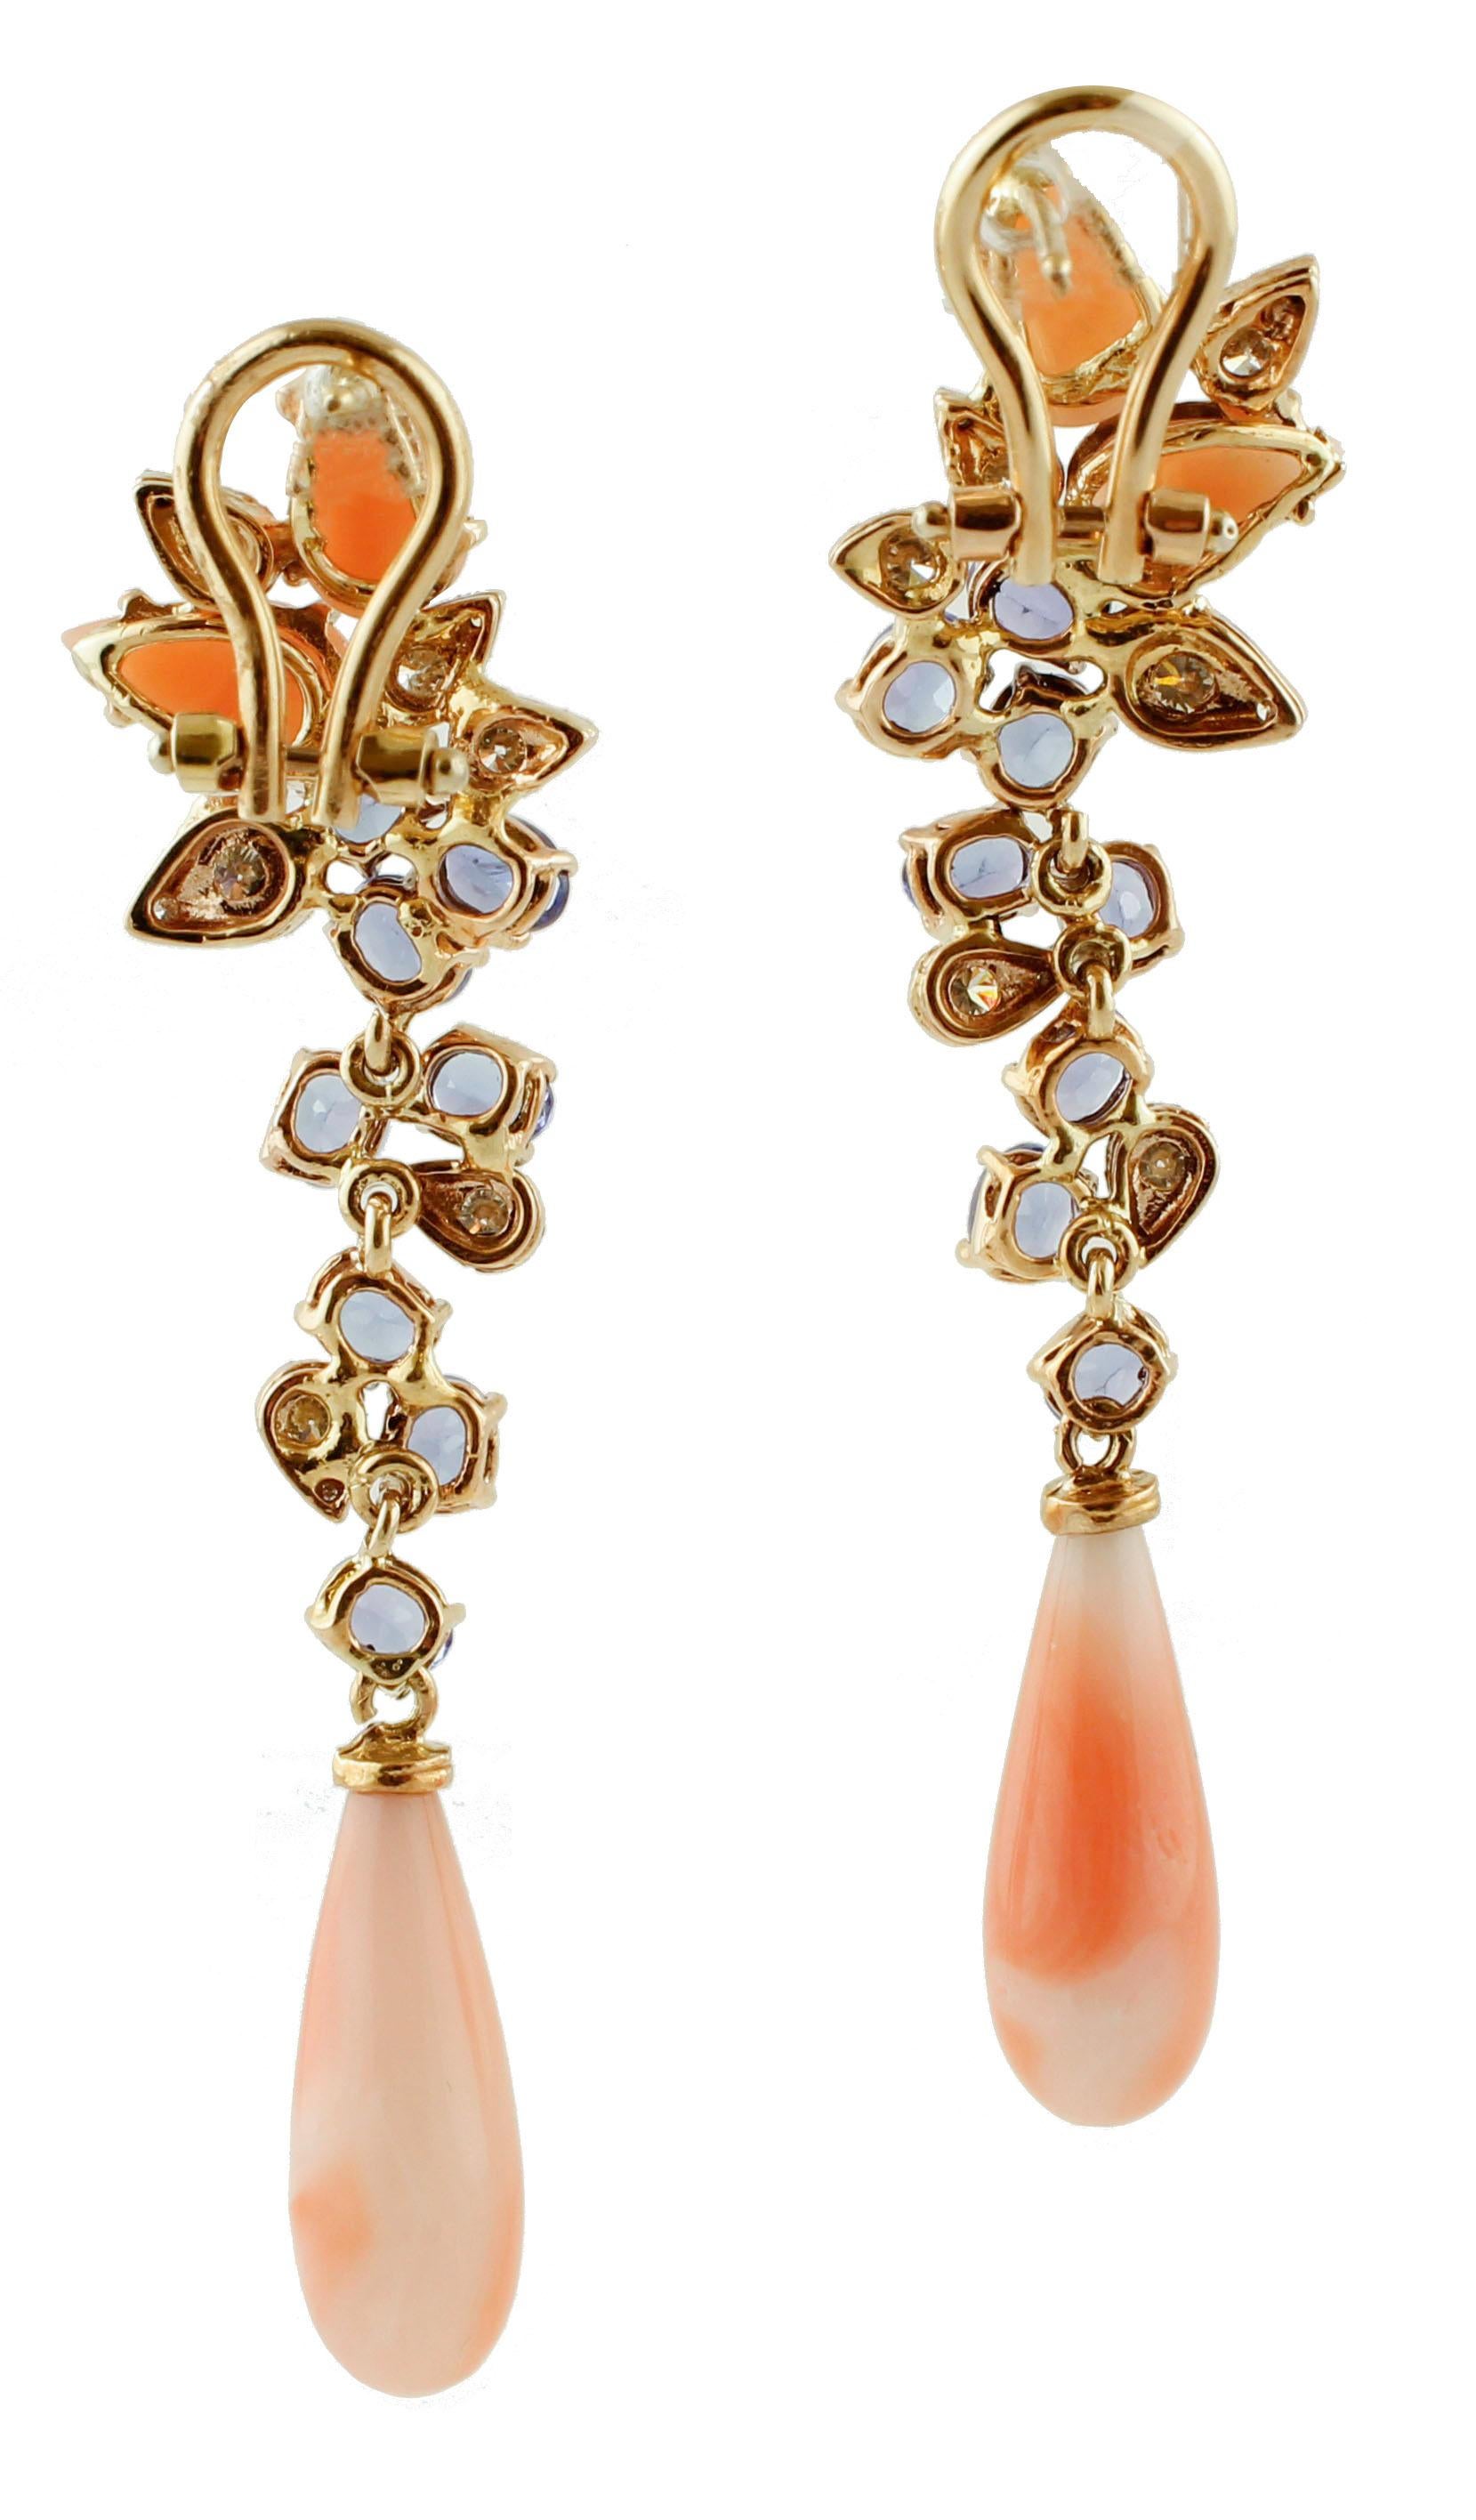 Beautiful and elegant earrings realized in 14K rose gold mounted at the top with angel skin pink coral small drops, tanzanite drops and diamonds, in the middle there are tanzanites  and other diamonds and at the bottom there are two angel skin pink